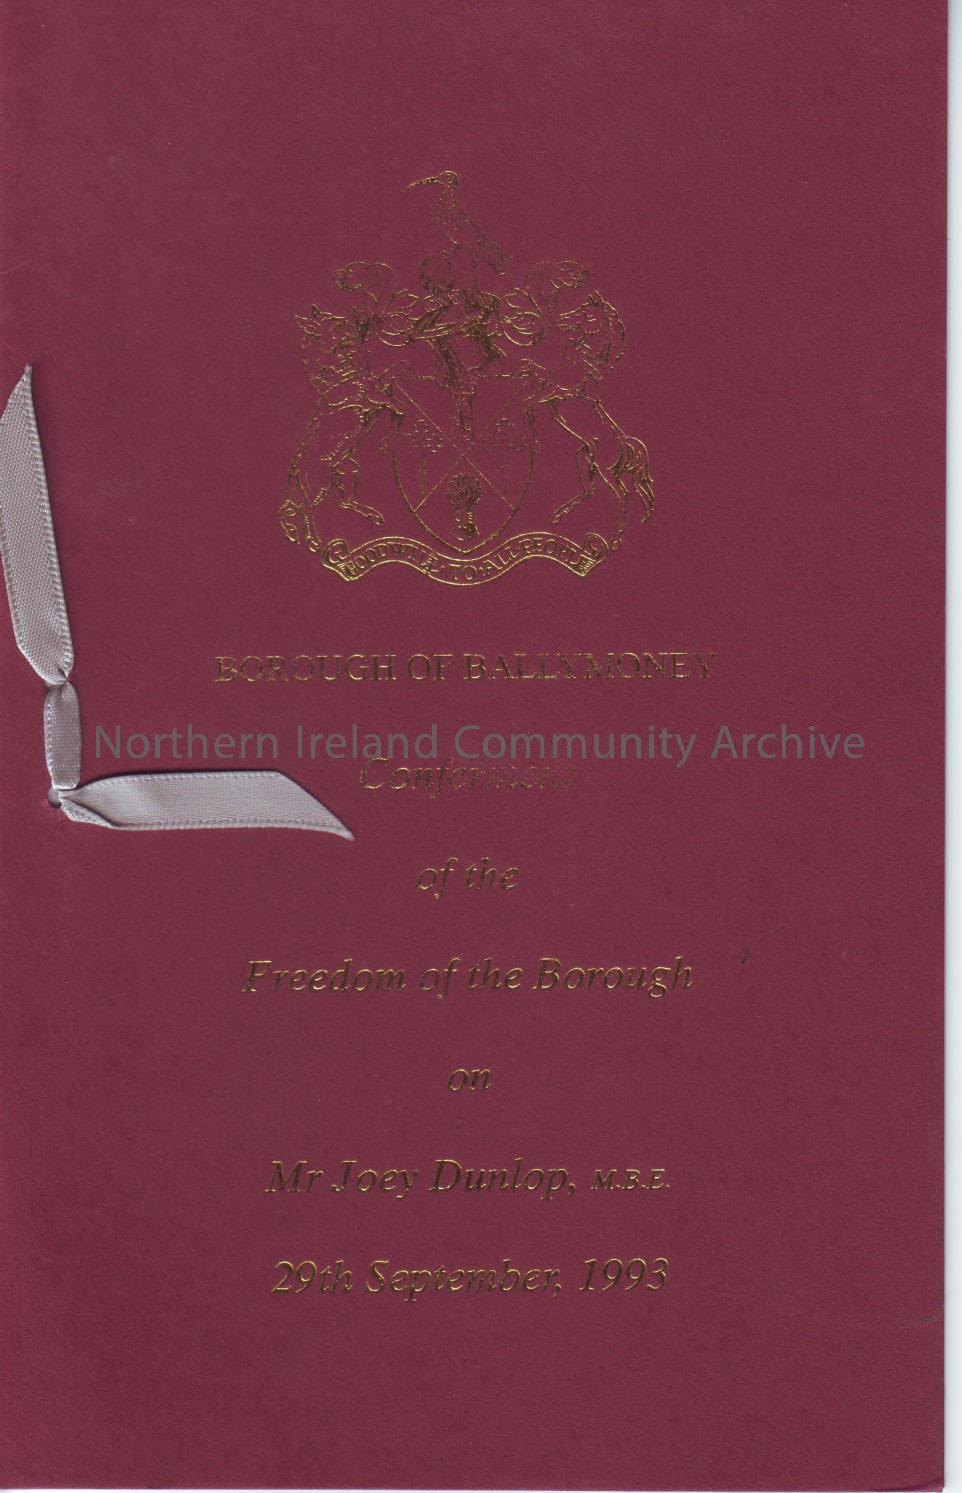 Borough of Ballymoney conferment of the Freedom of the Borough on Mr Joey Dunlop, M.B.E 29th September, 1993 programme and civic dinner menus. – 2011.292 (3)